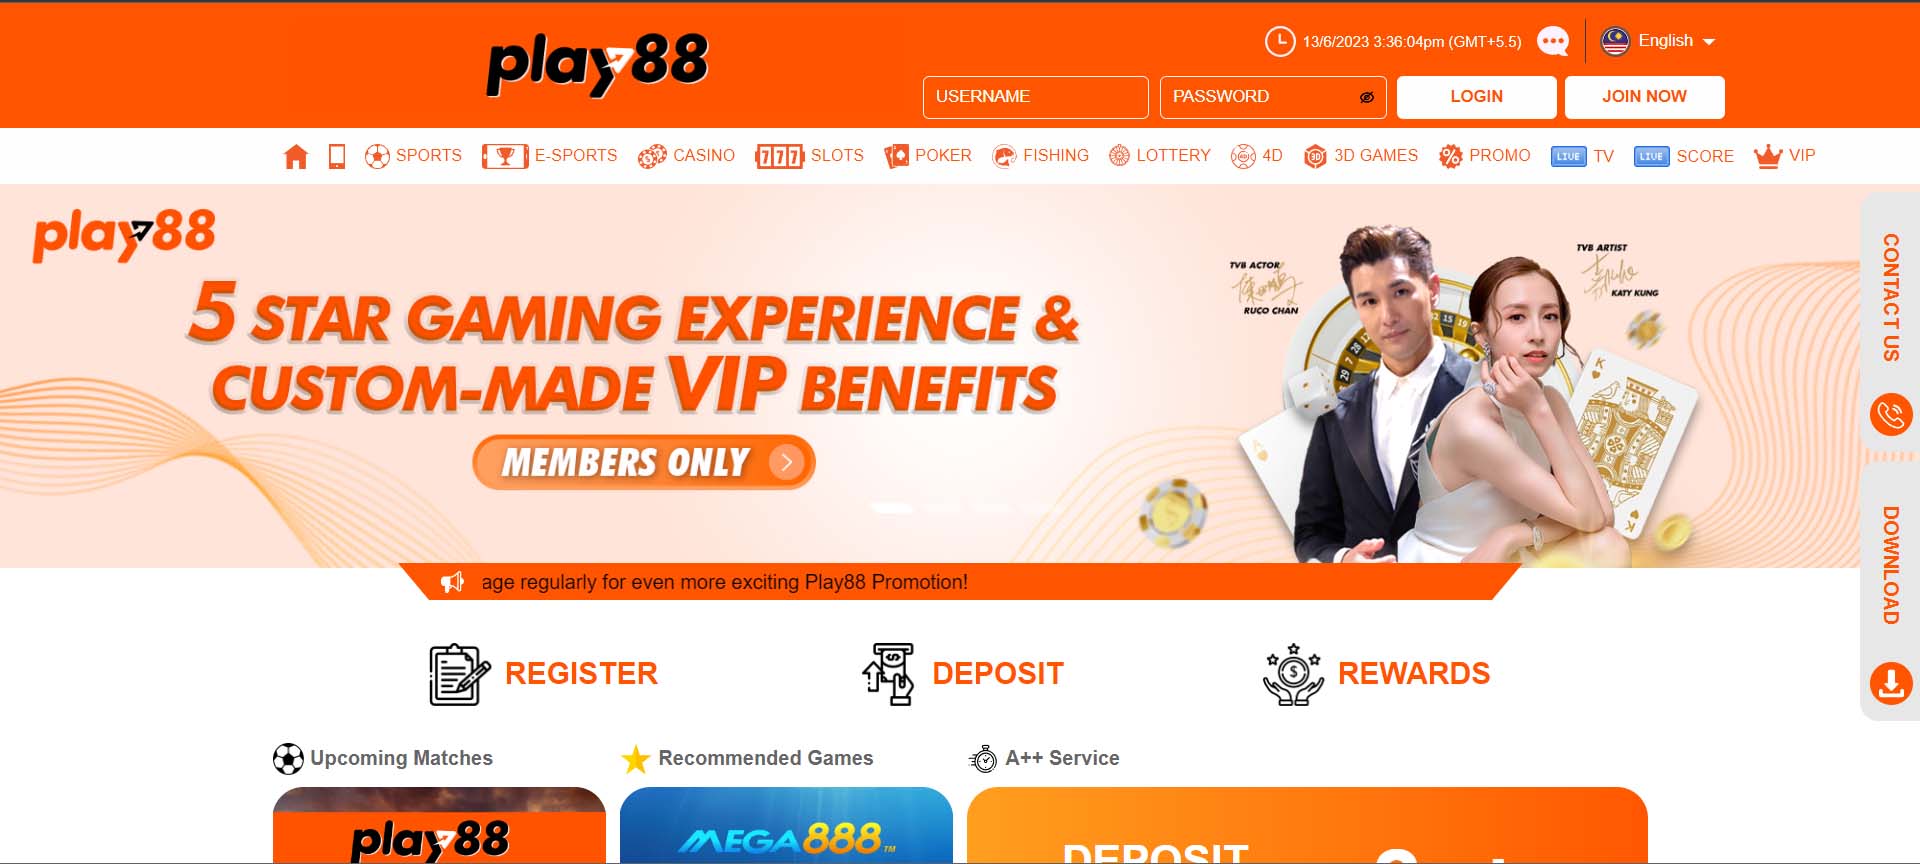 Play 88 Online Casino in Singapore